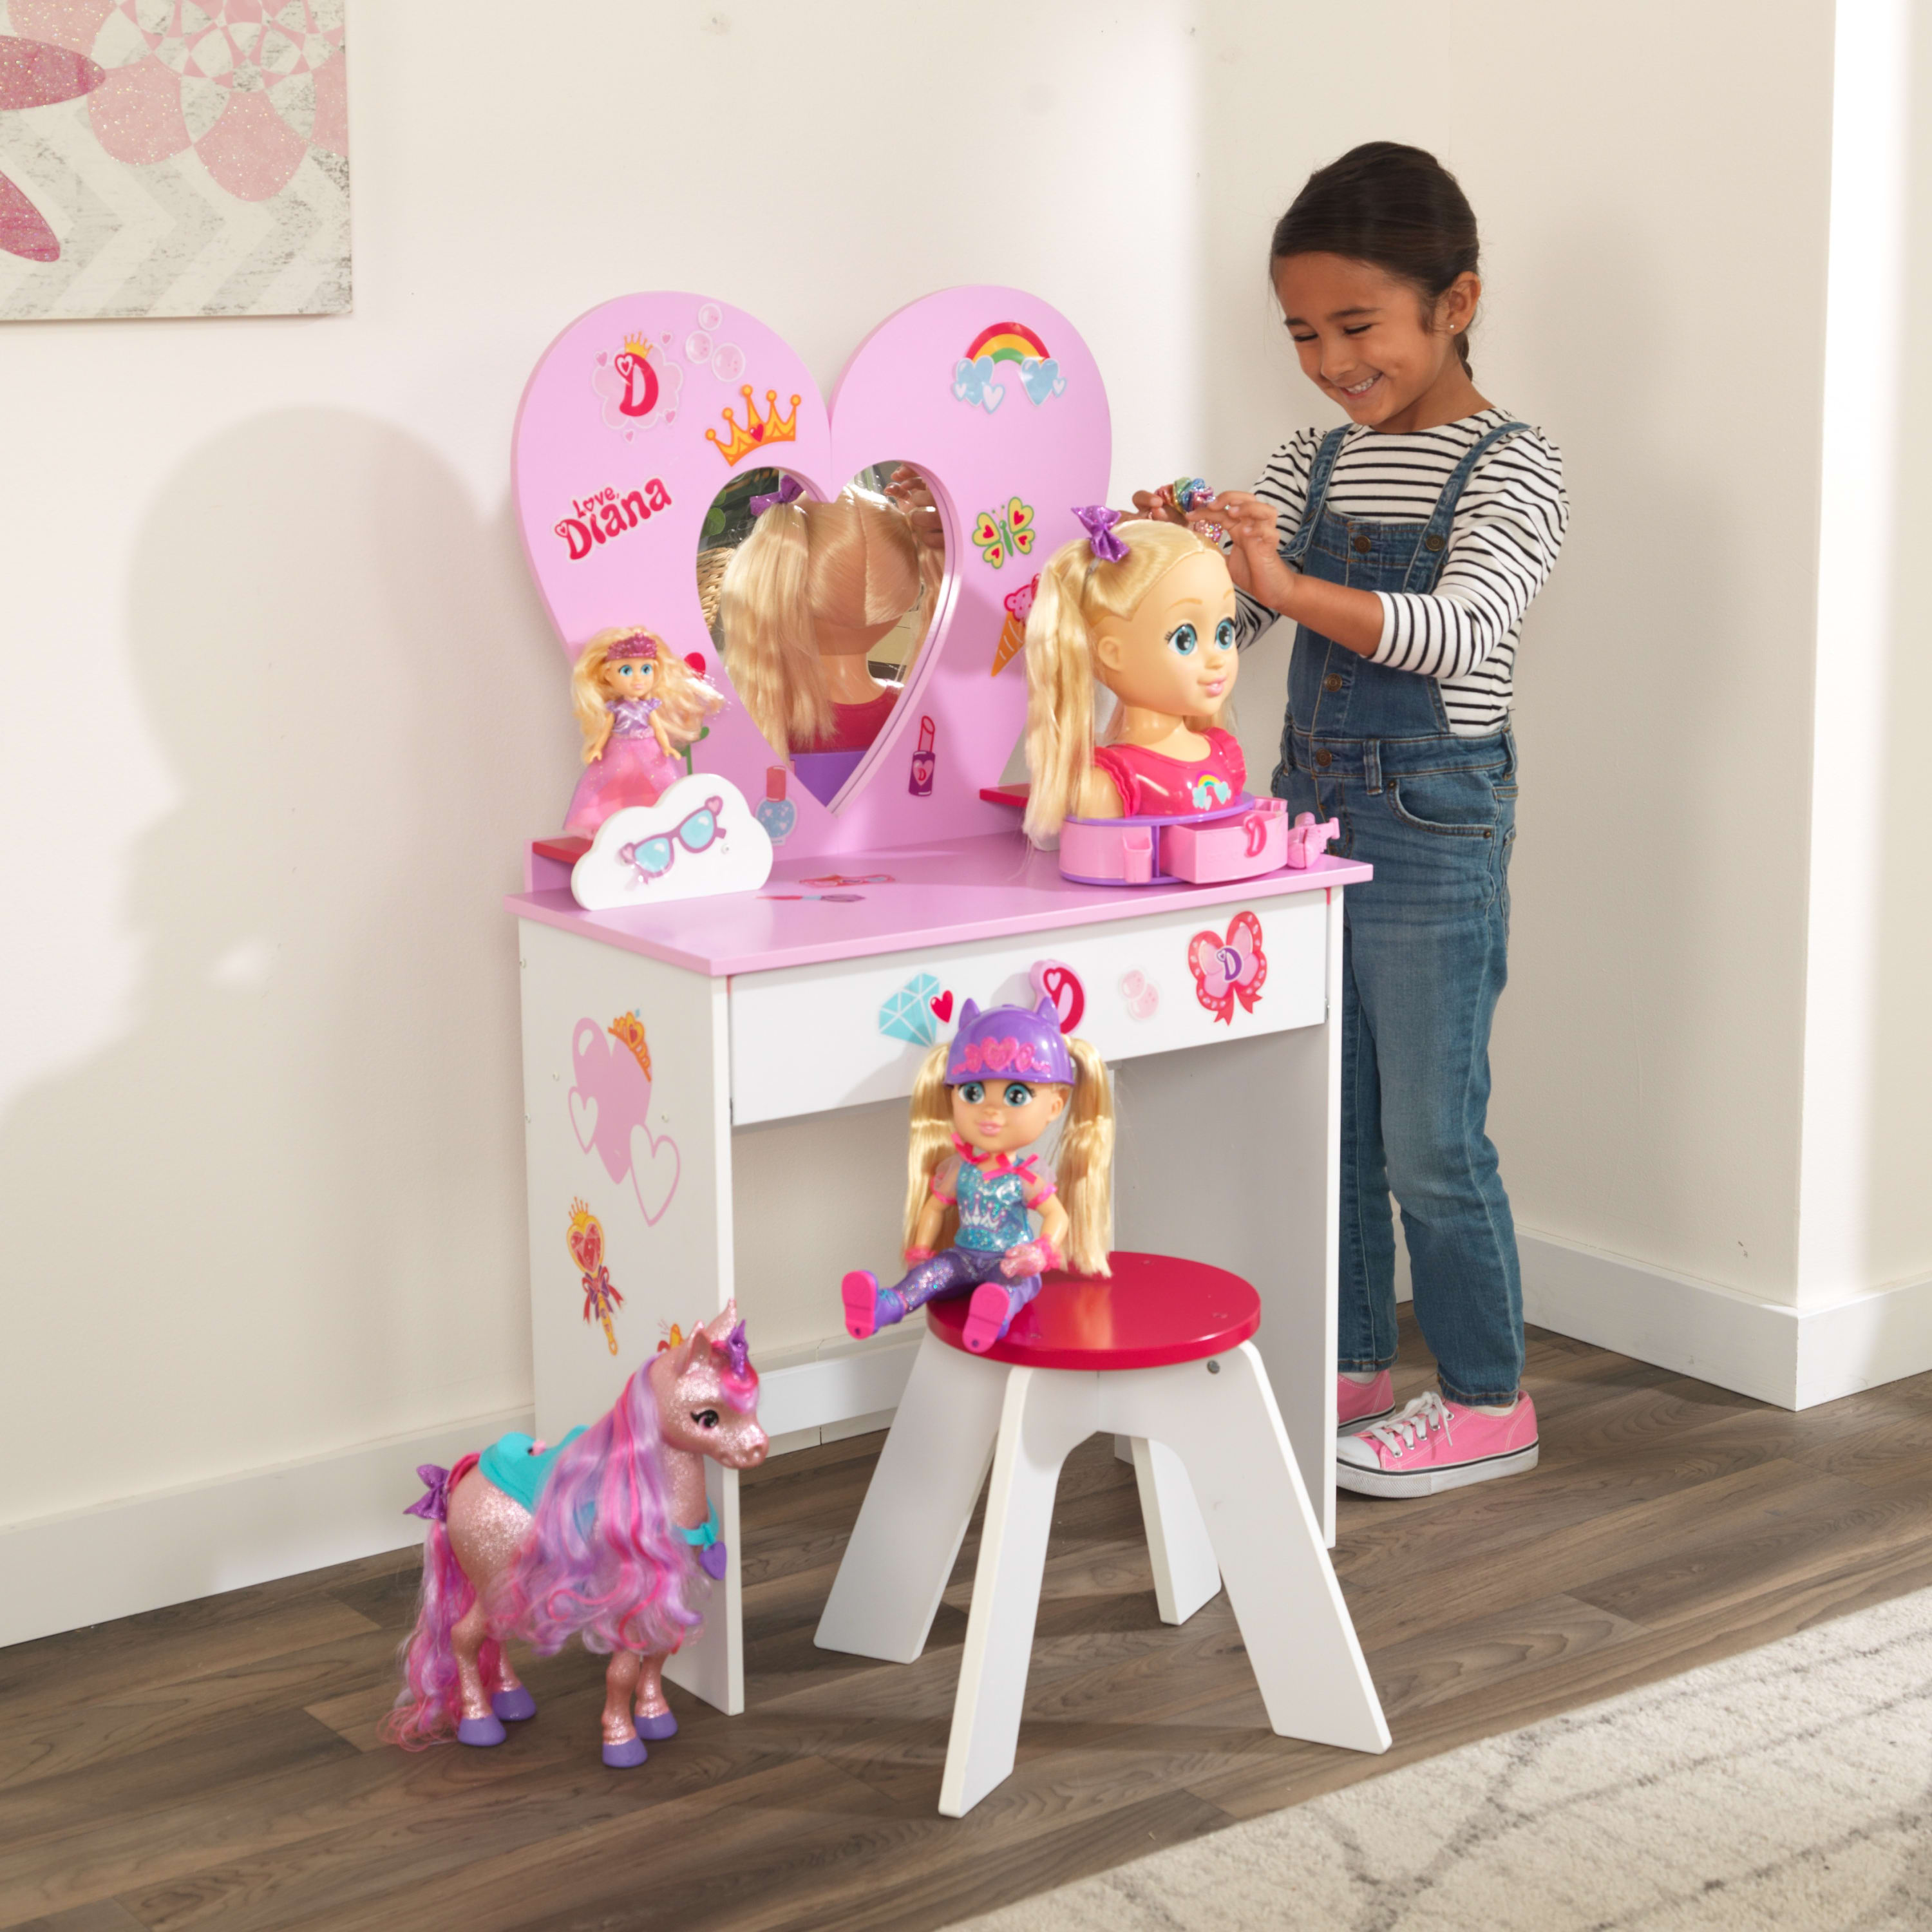 KidKraft Love, Diana™ Wood Heart Vanity Toy Set with Stool & Stickers for Personalization - image 2 of 8